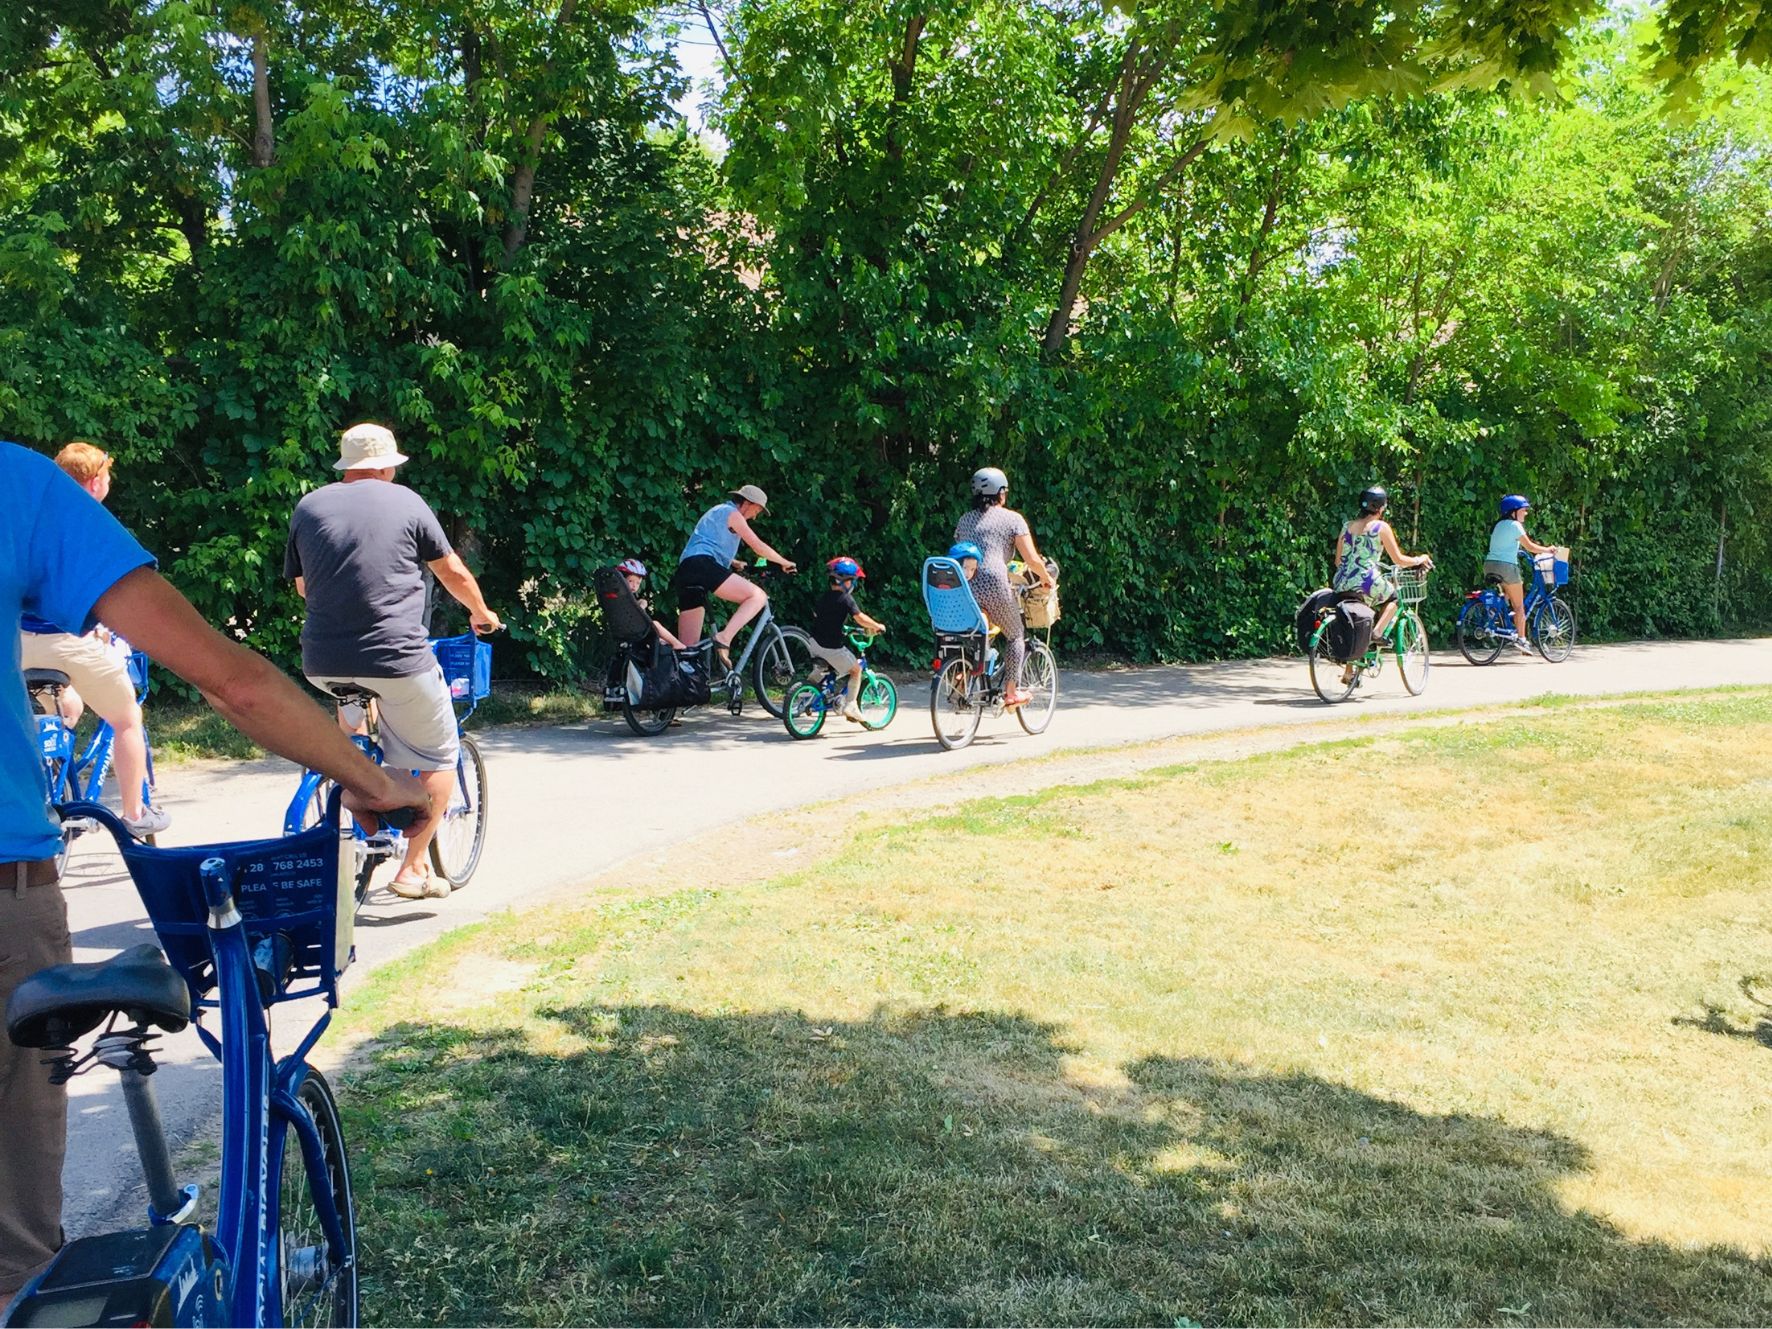 A group of people riding bicycles on a park trail. The photo is taken from behind the group